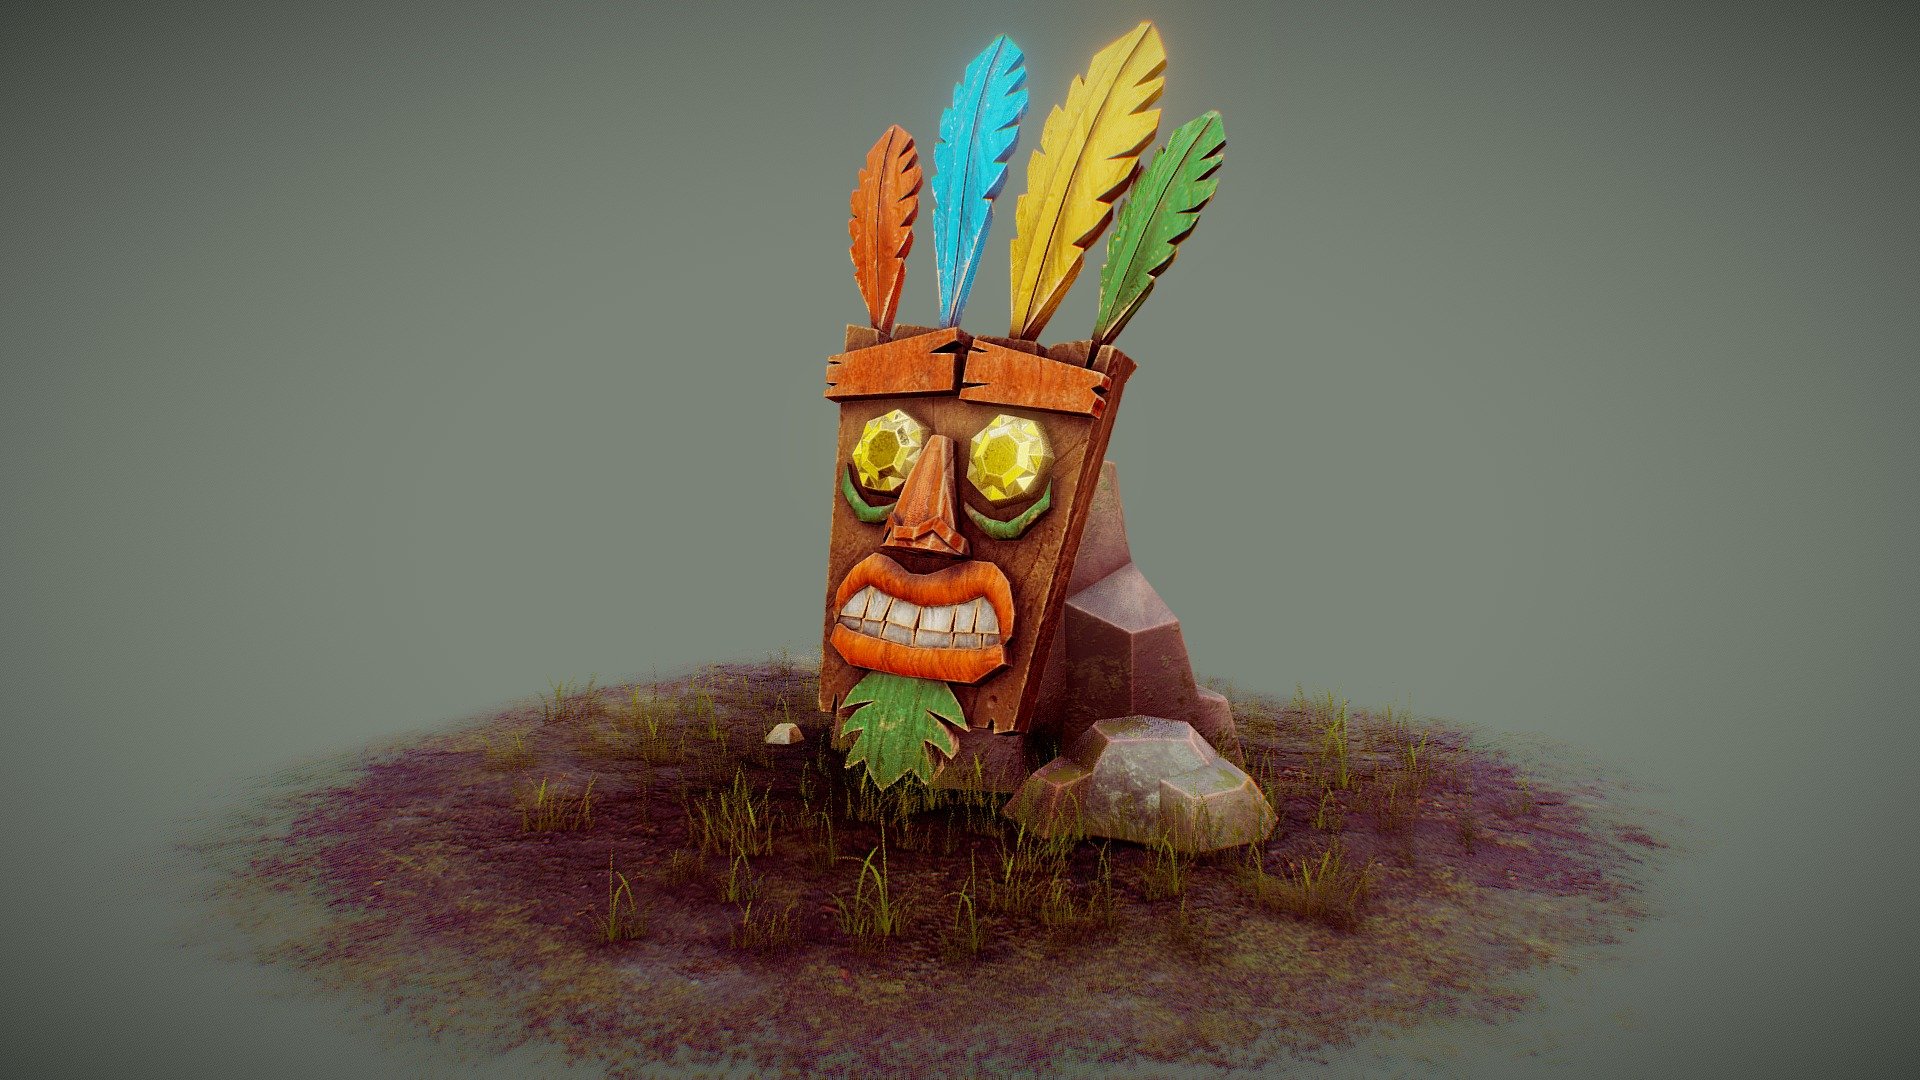 Fanart of Aku Aku from the Crash Bandicoot series. Based on an early concept, with jewels for eyes and wooden feathers 3d model